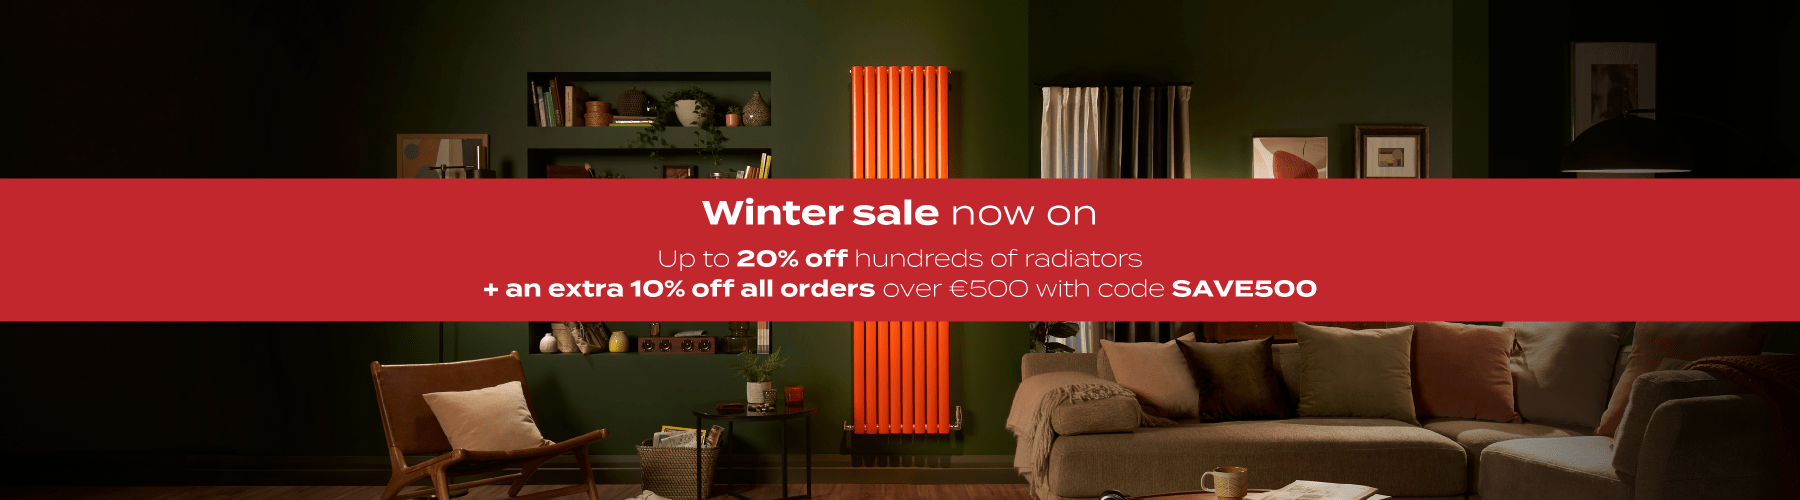  Winter Sale | up to 20% off hundreds of radiators + an extra 10% off orders over €500 with code SAVE500 